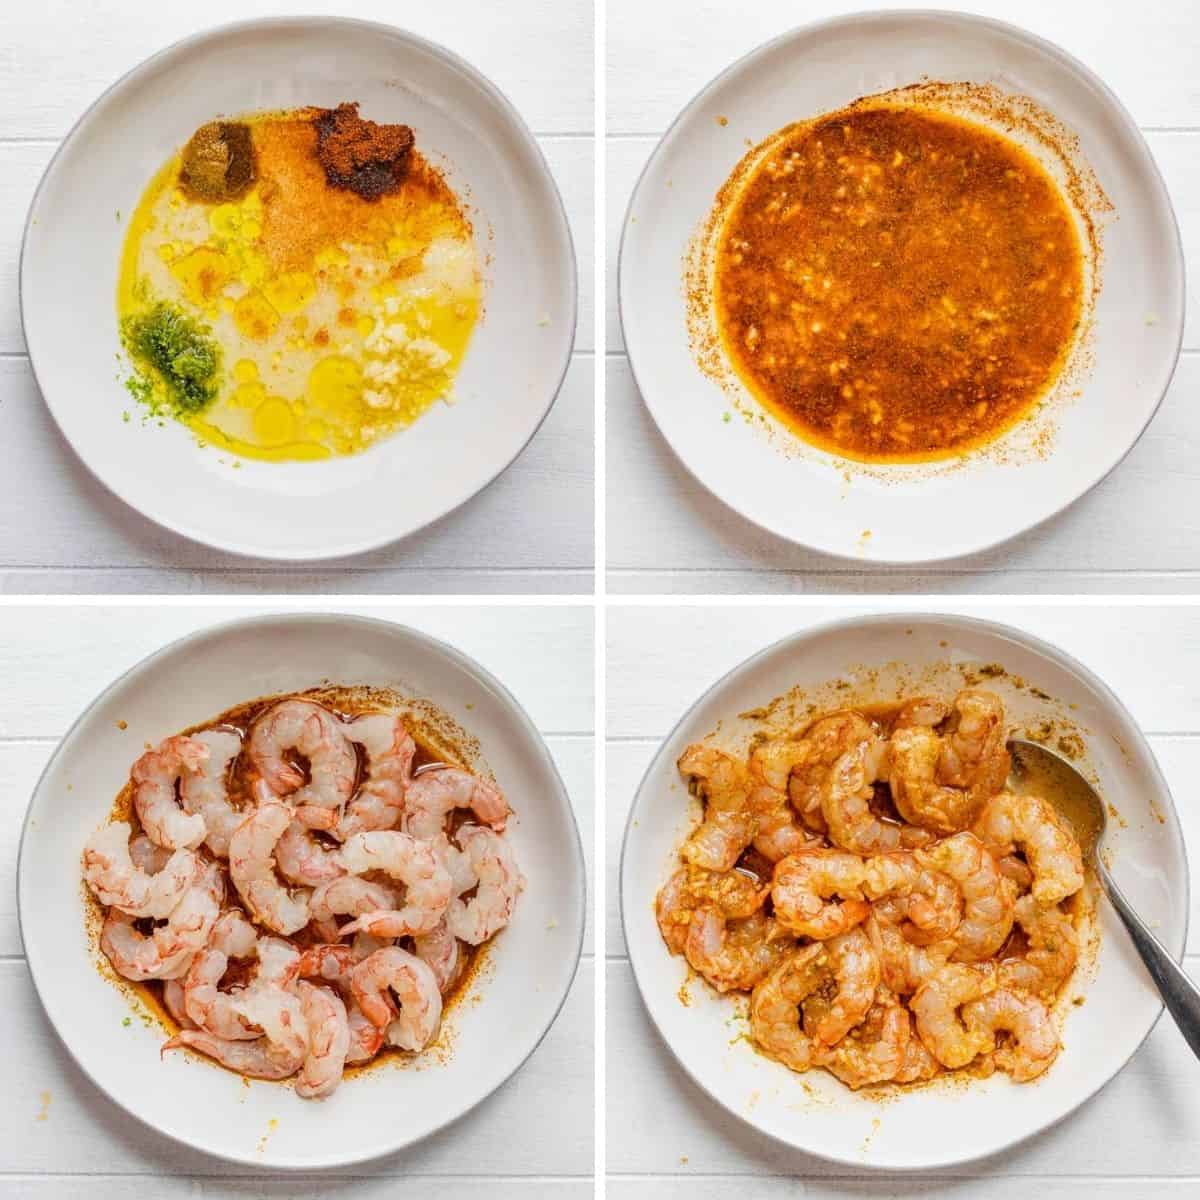 Steps to show how to make the marinade and mix with the shrimp all in one bowl